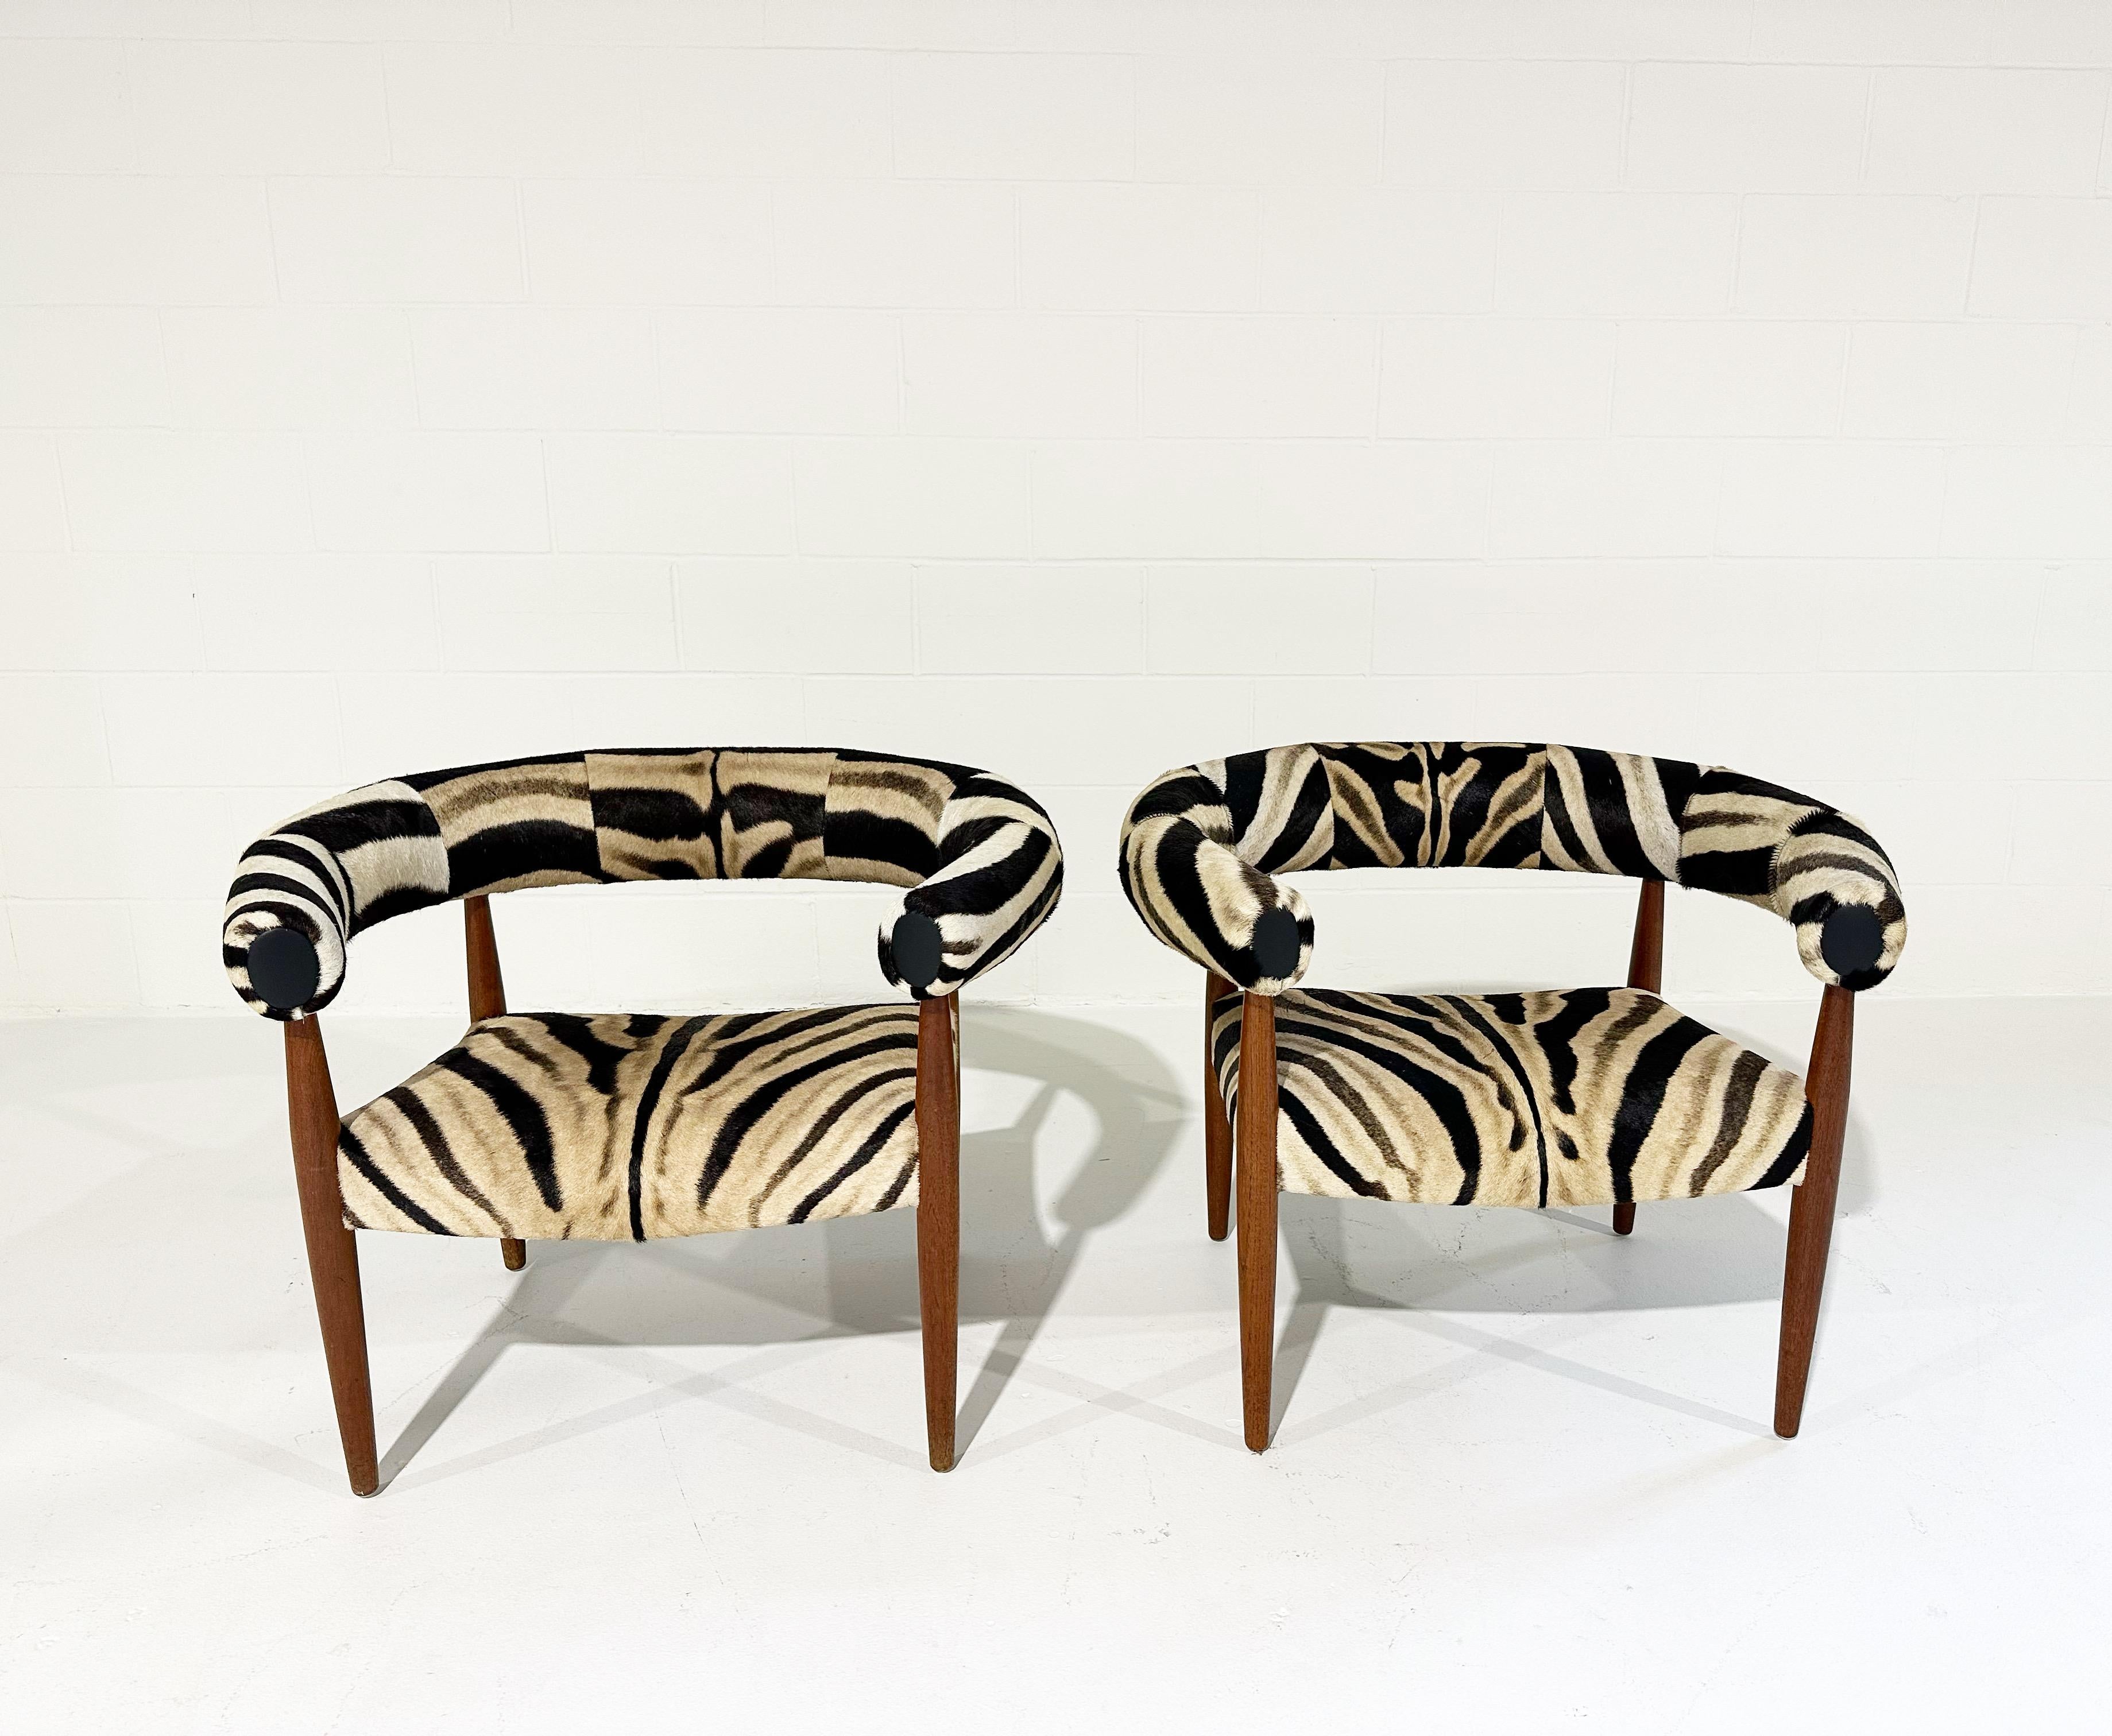 Vintage Nanna and Jorgen Ditzel Ring Lounge Chairs in Zebra Hide For Sale 3